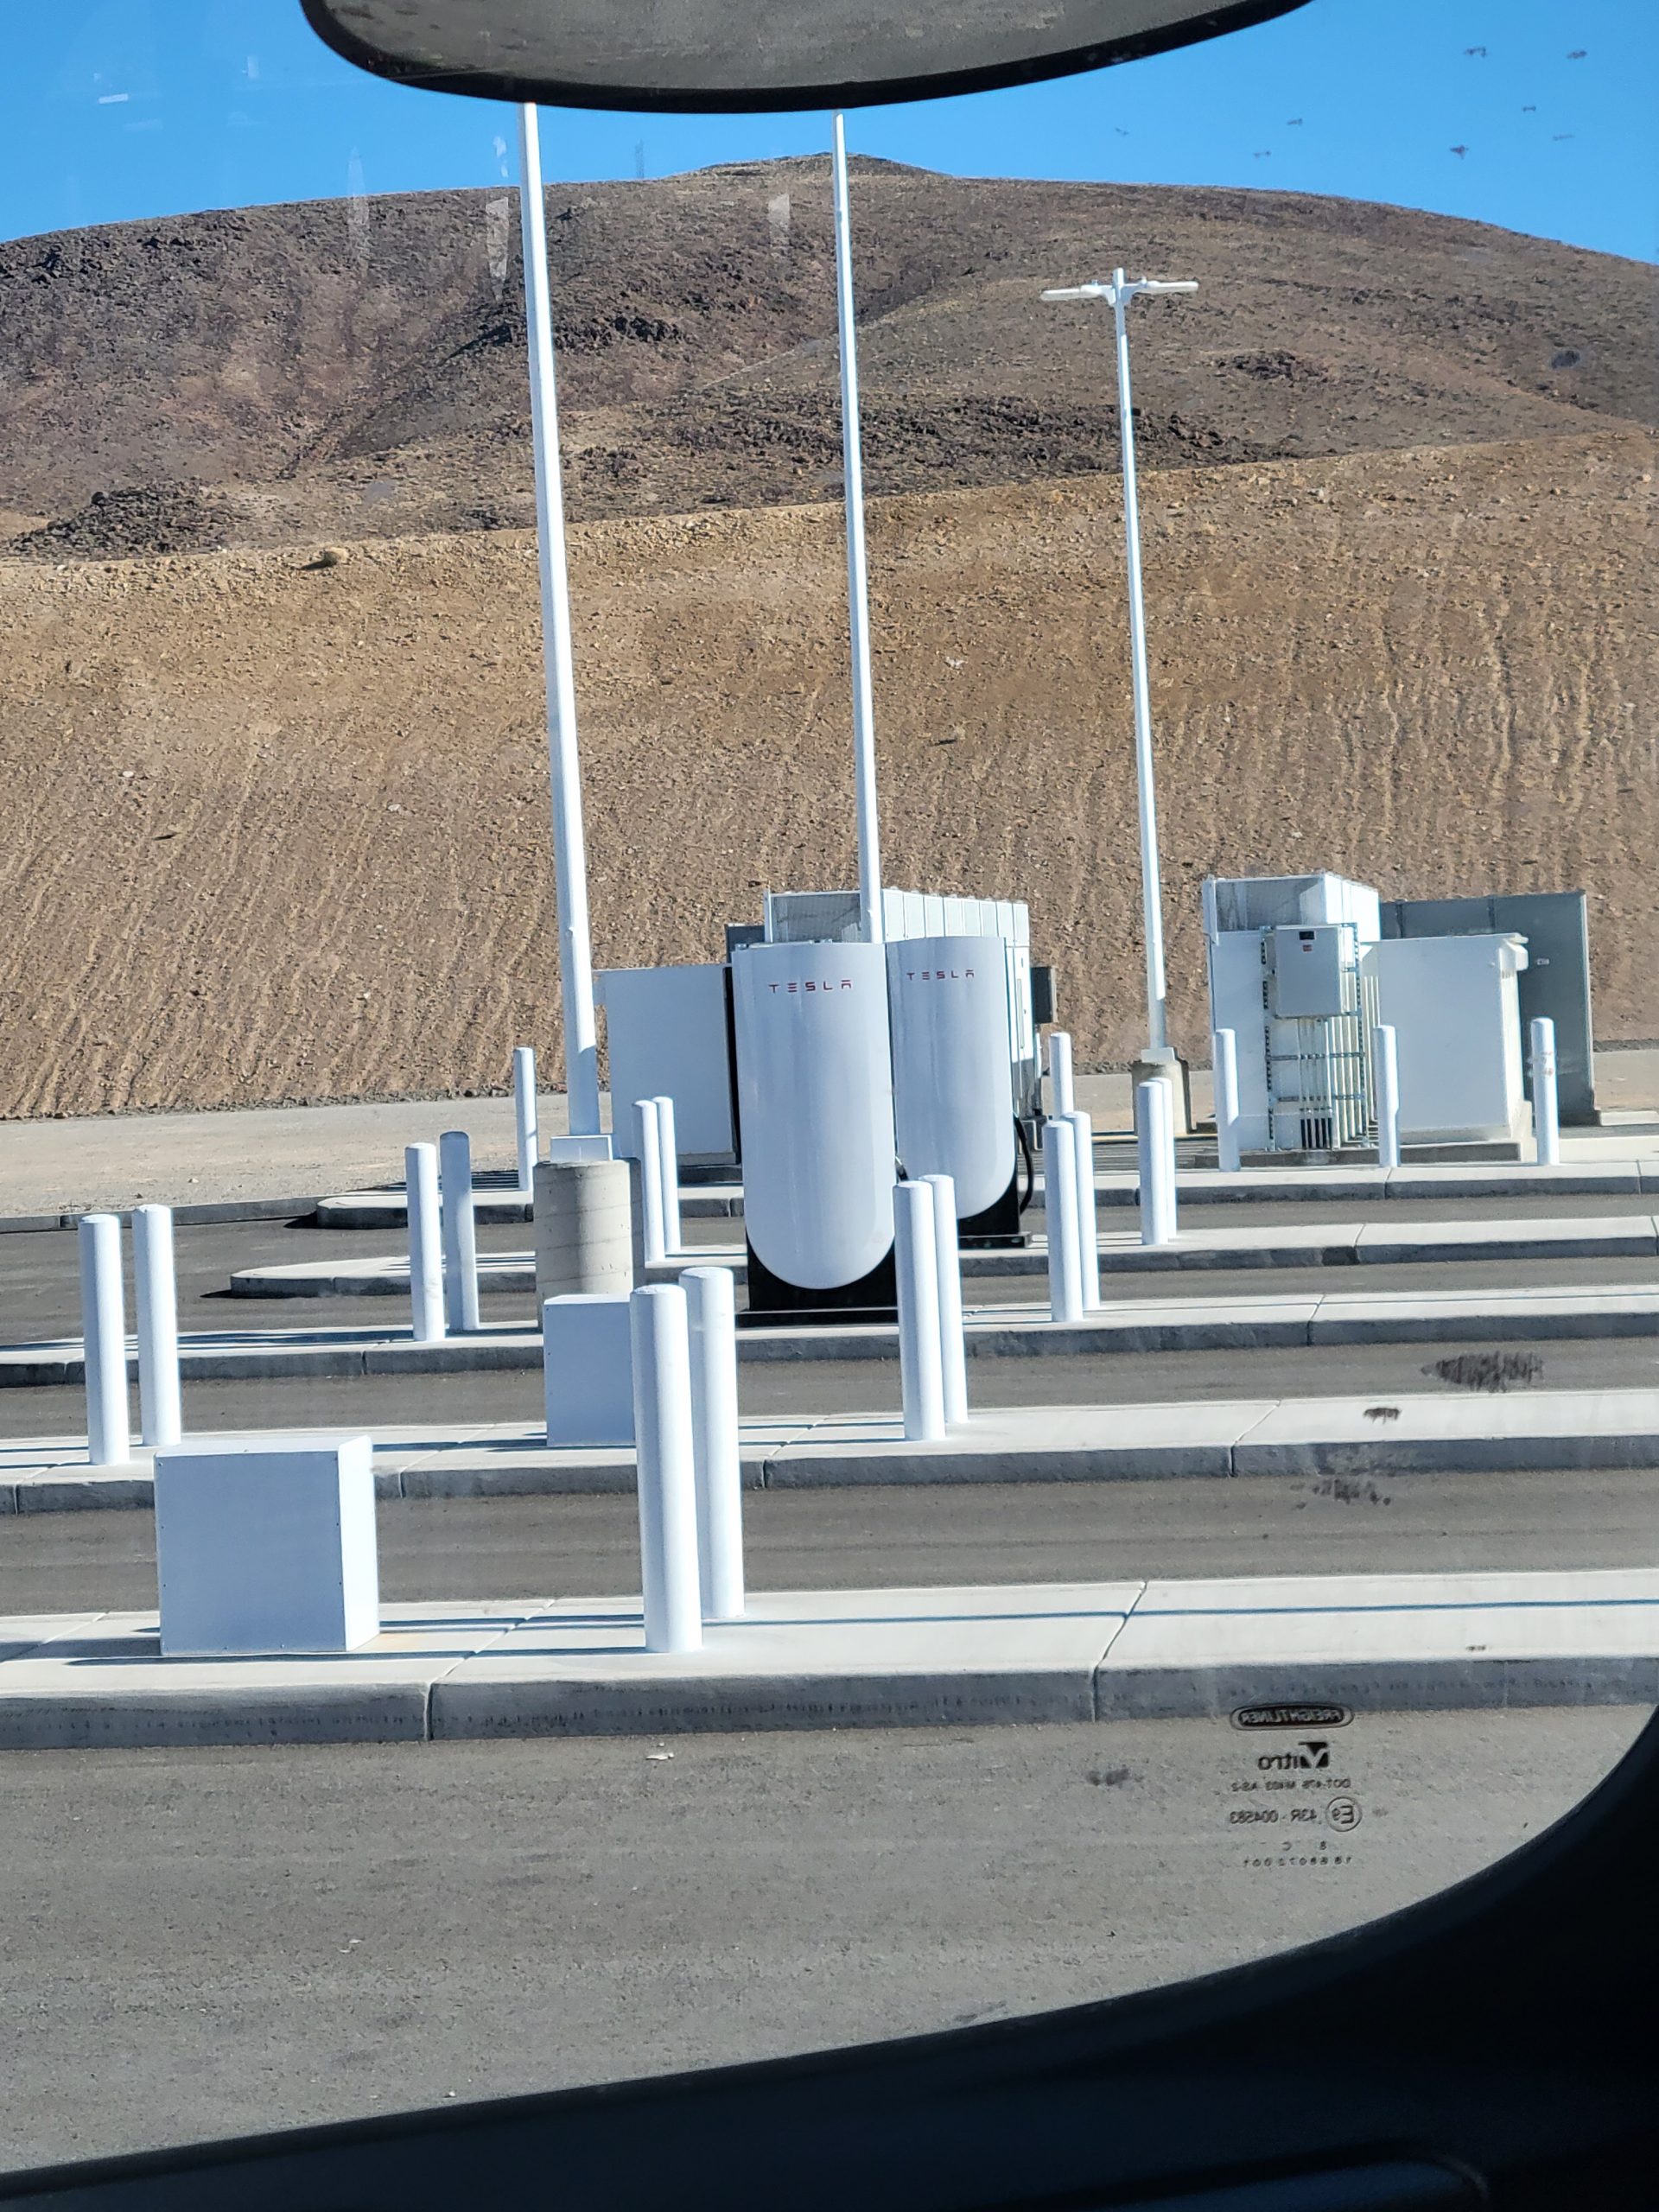 tesla giga nevada images hint at potential mobile megacharger solution